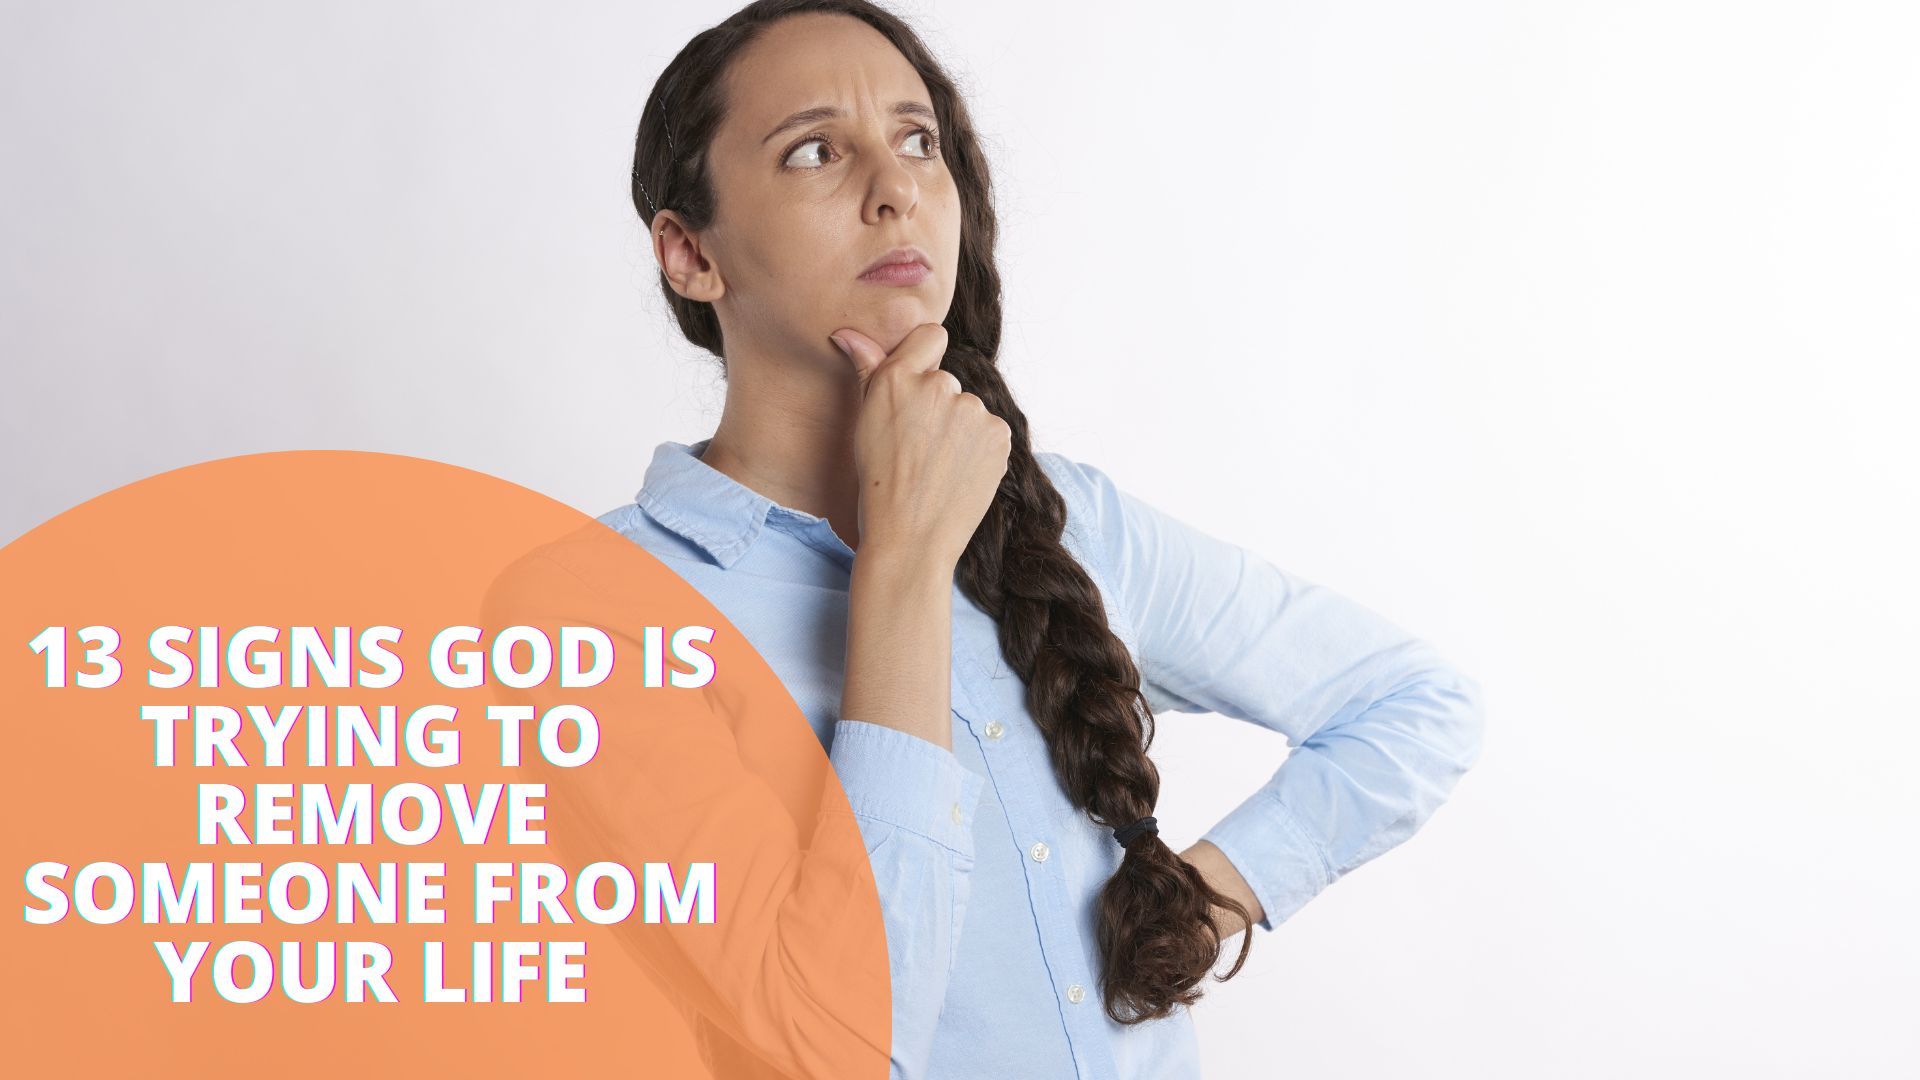 13 Signs God Is Trying To Remove Someone From Your Life